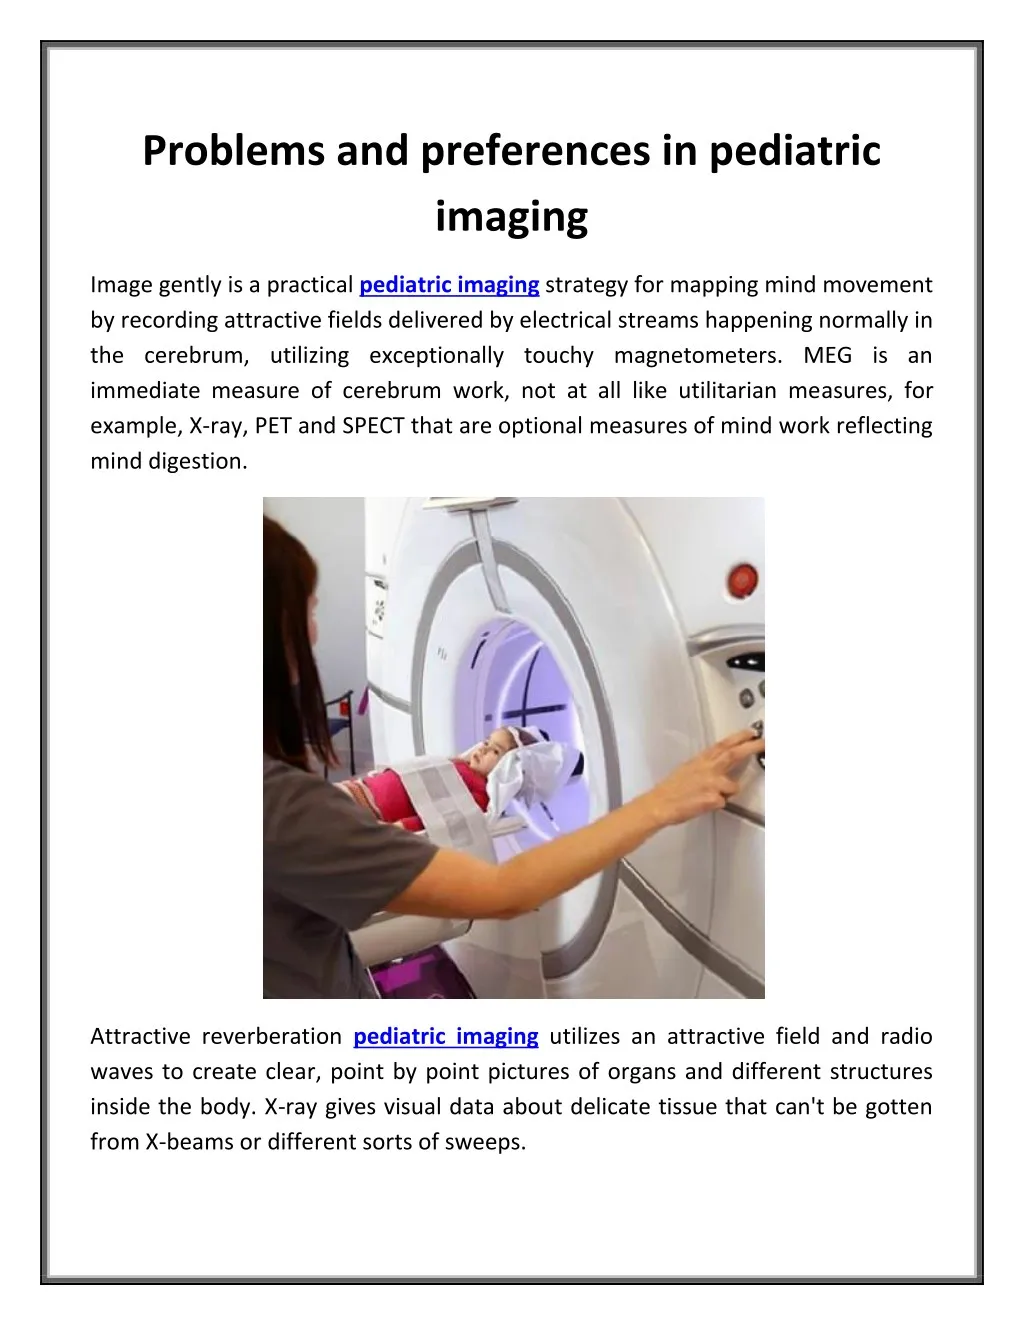 problems and preferences in pediatric imaging